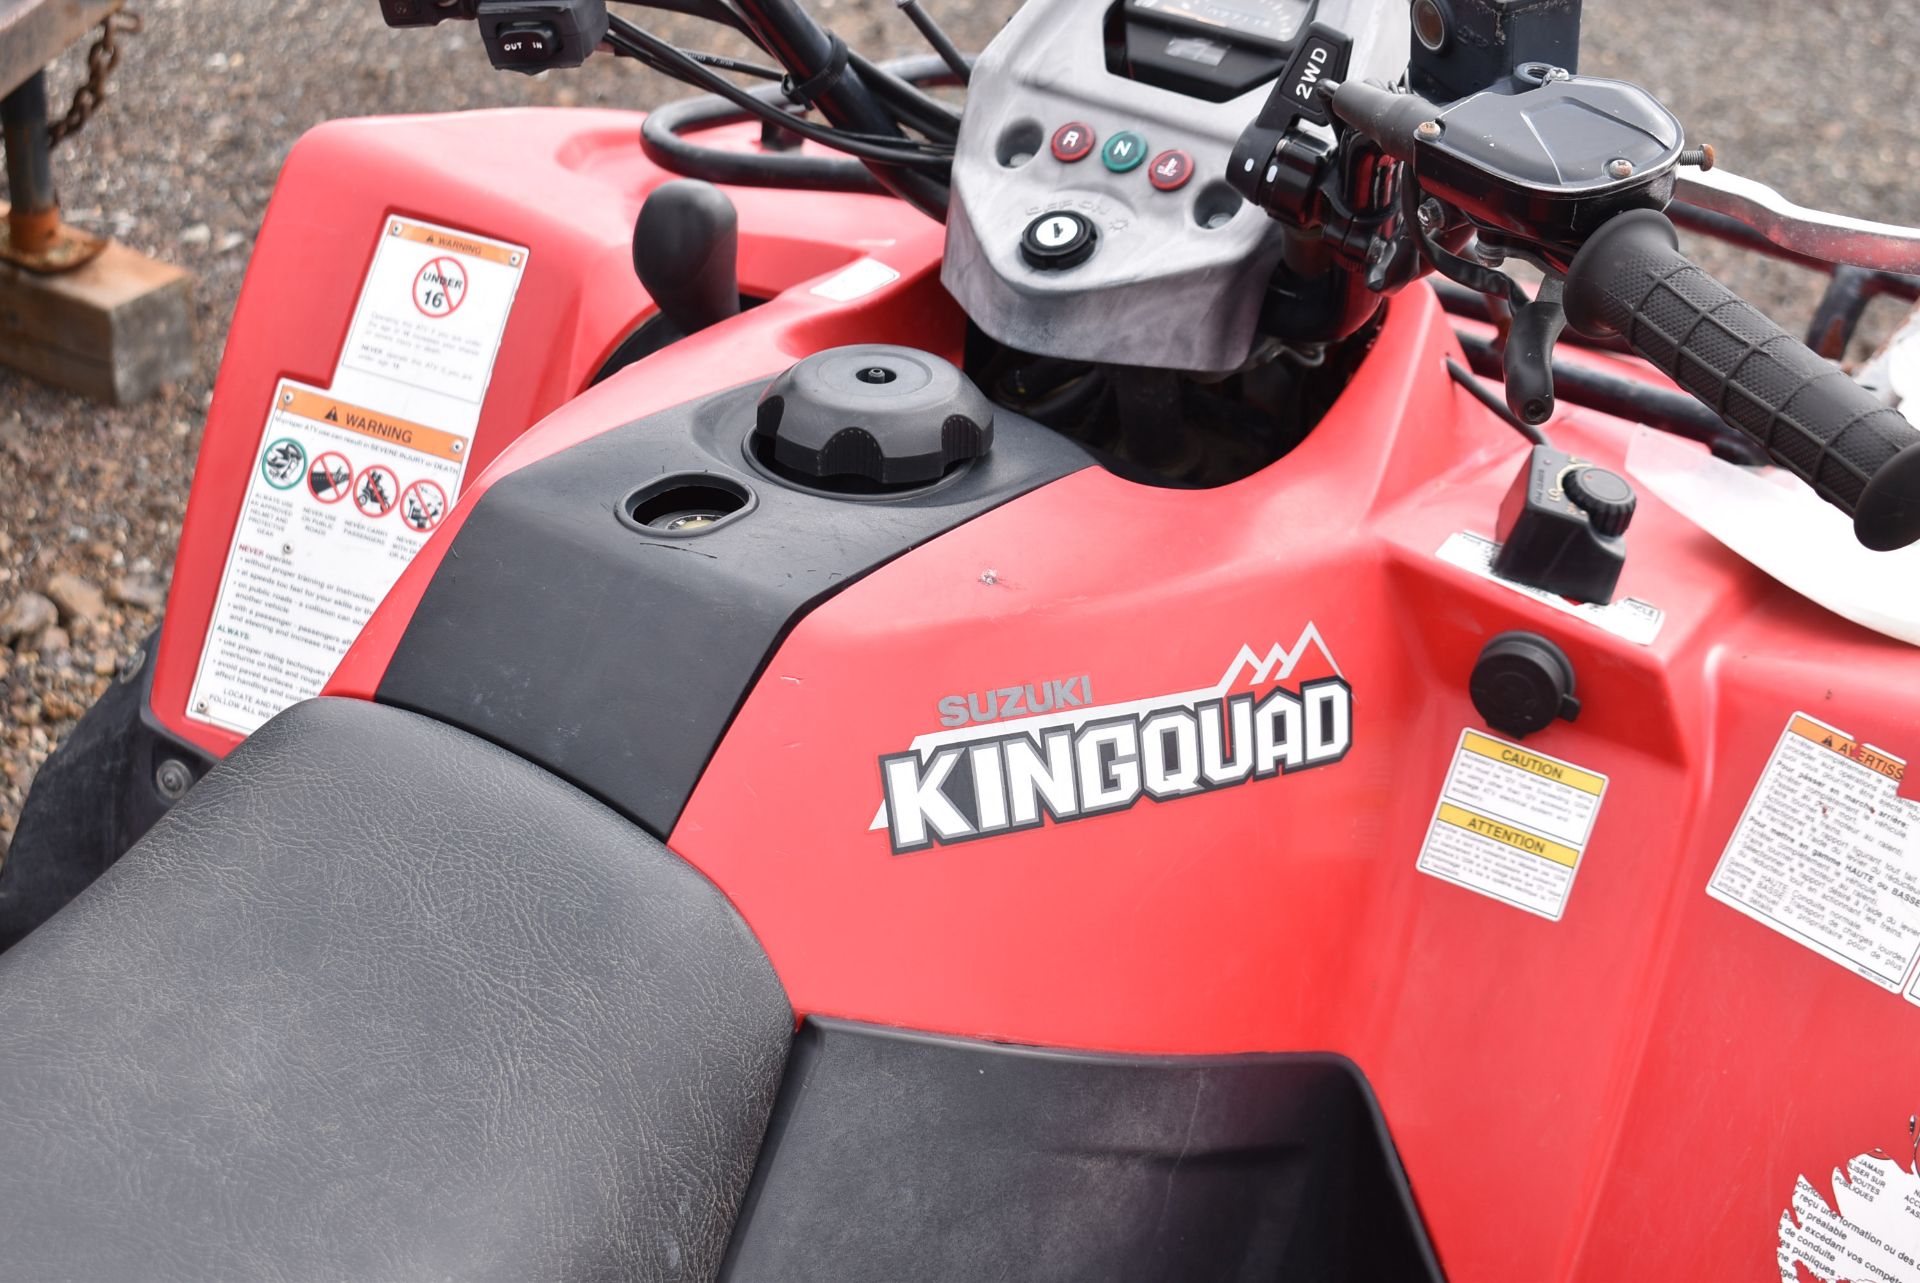 SUZUKI (2008) KING QUAD 400FSI 4X4 ATV WITH 2,711 KM (RECORDED ON ODOMETER AT TIME OF LISTING), VIN: - Image 6 of 12